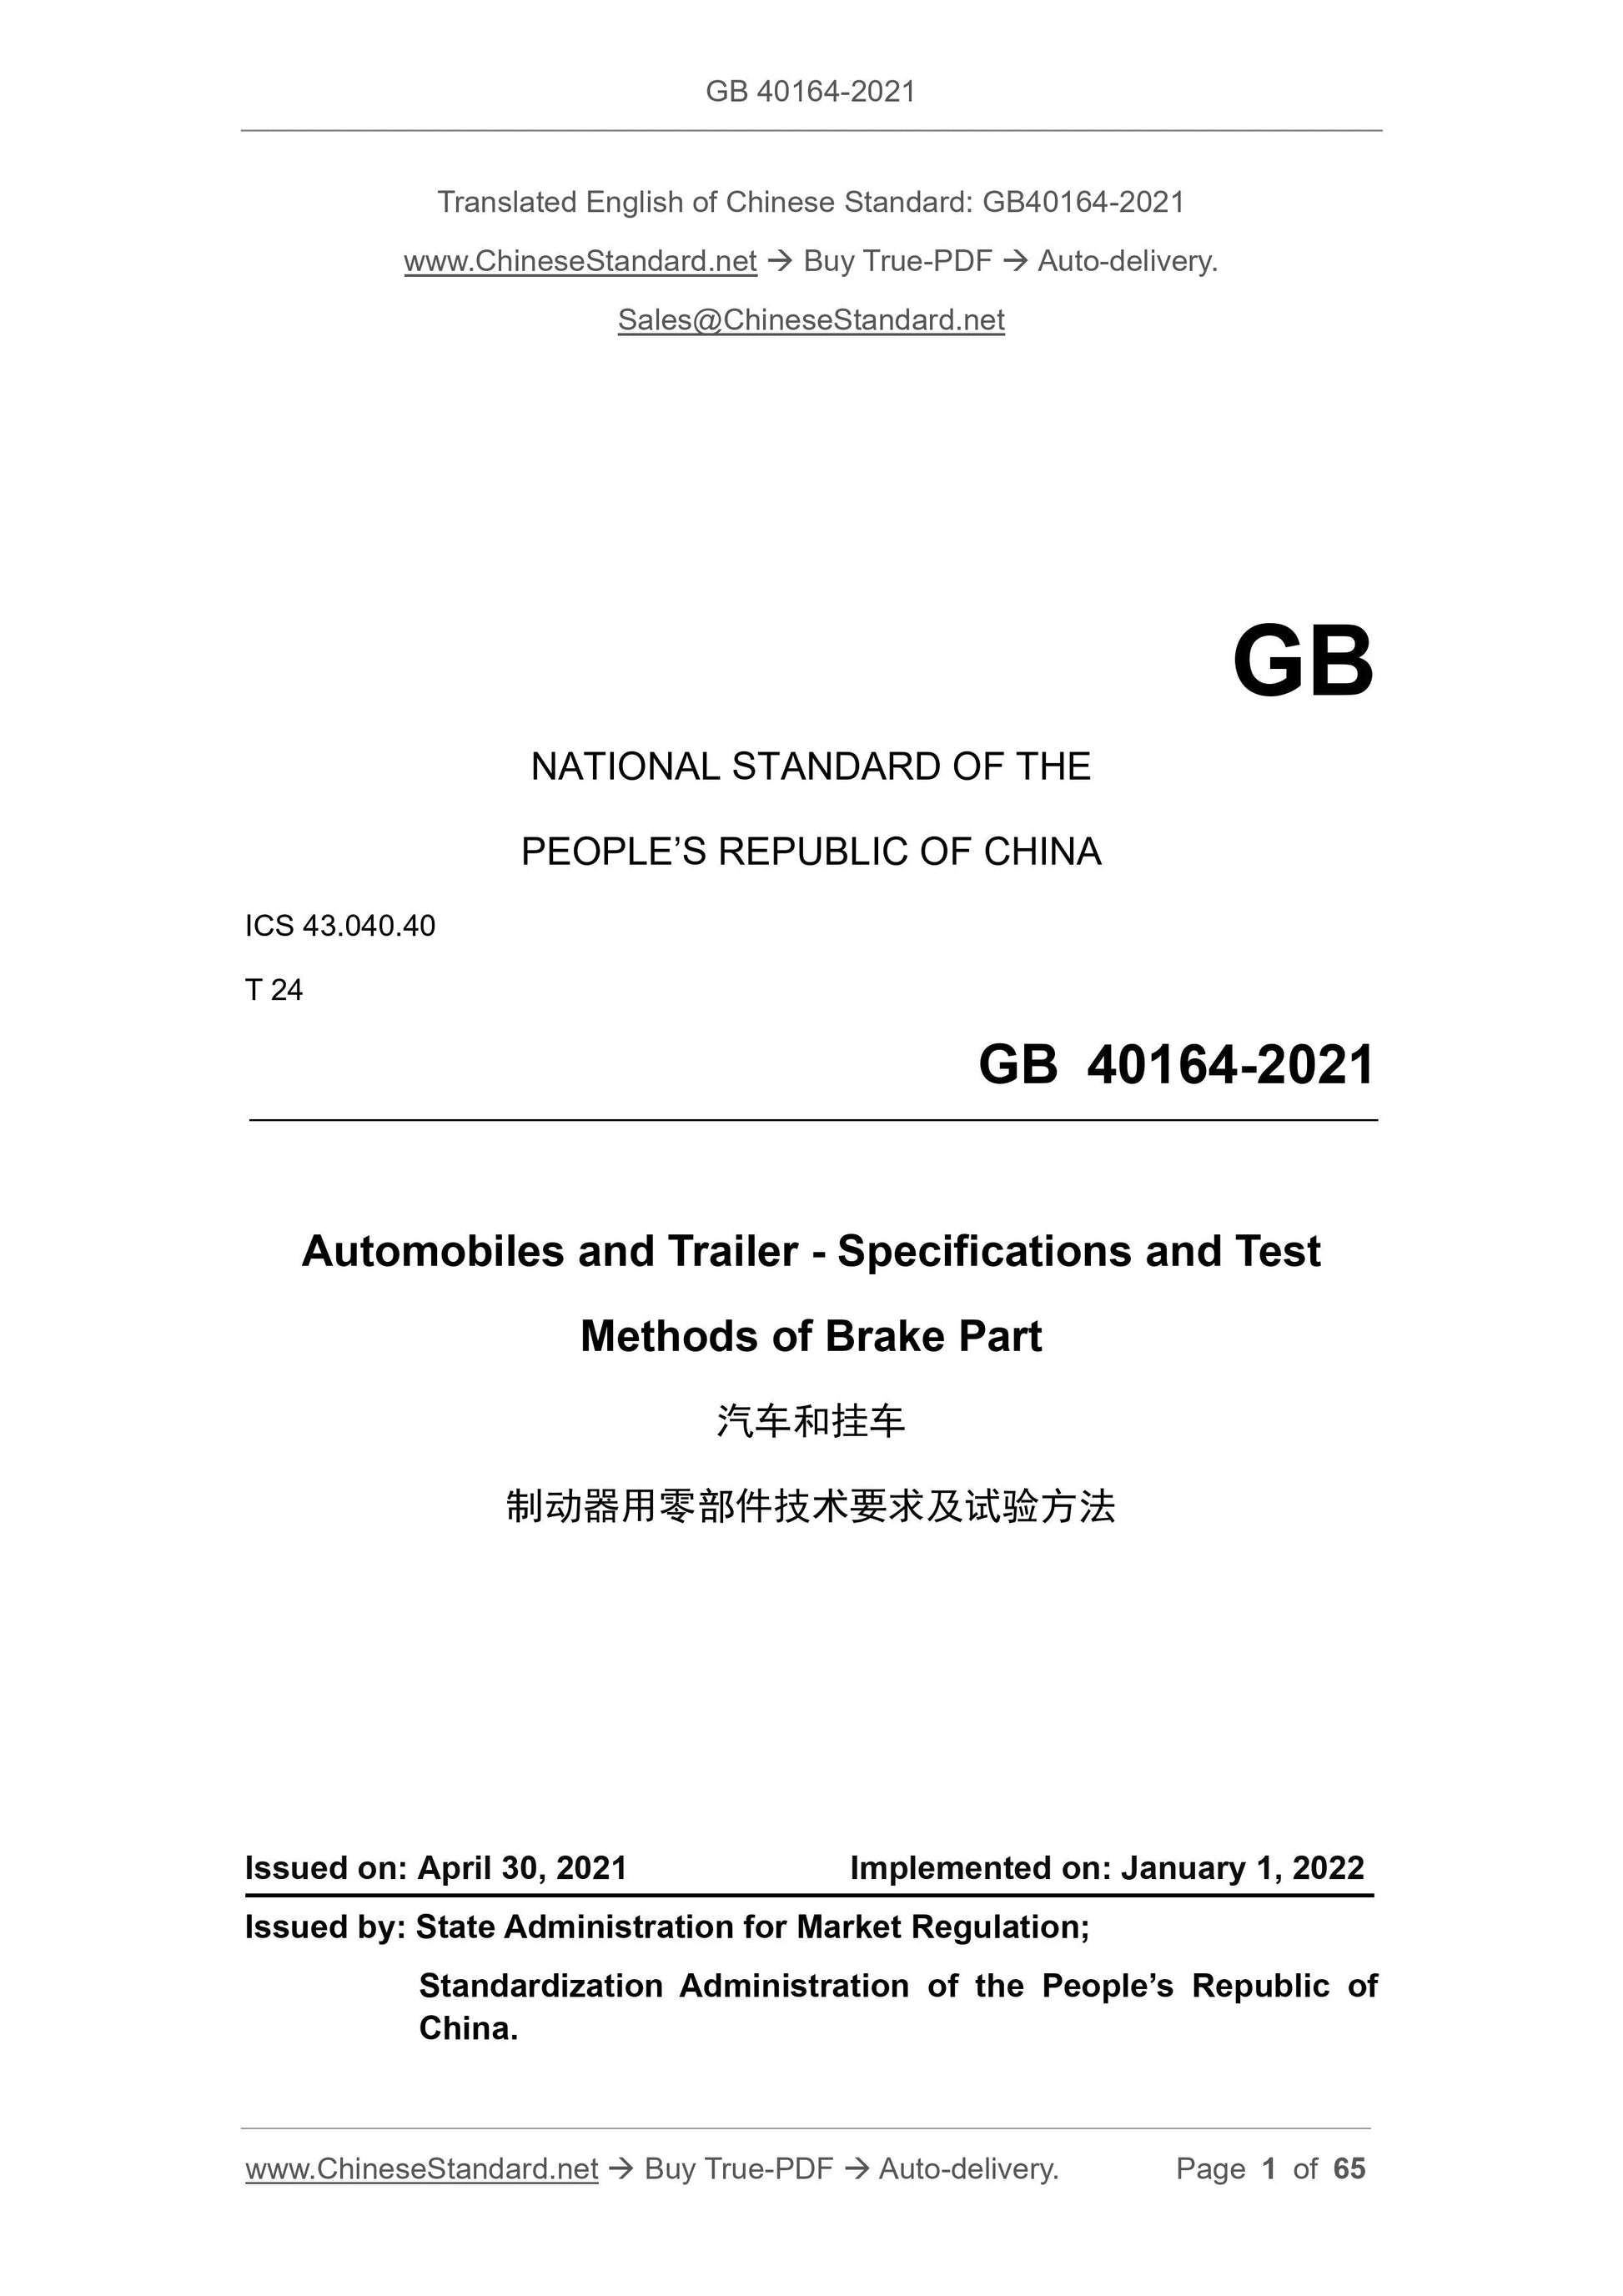 GB 40164-2021 Page 1